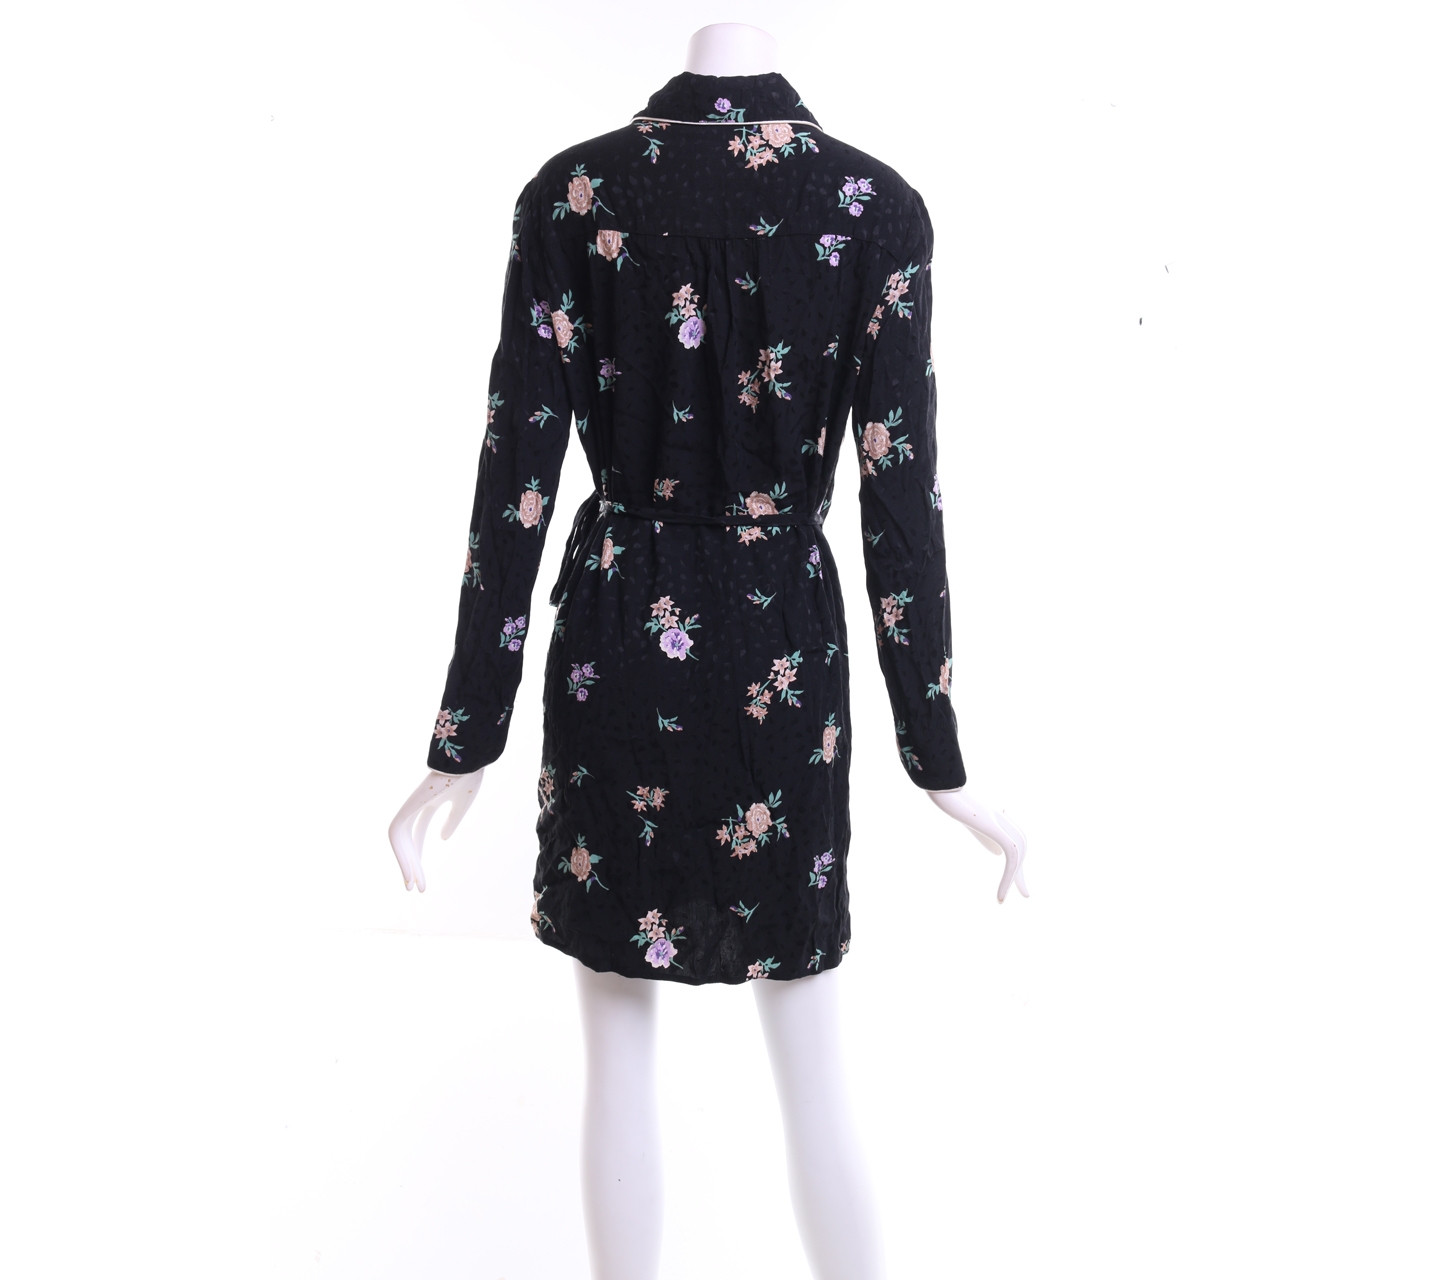 Pins and Needles Black Floral Outerwear